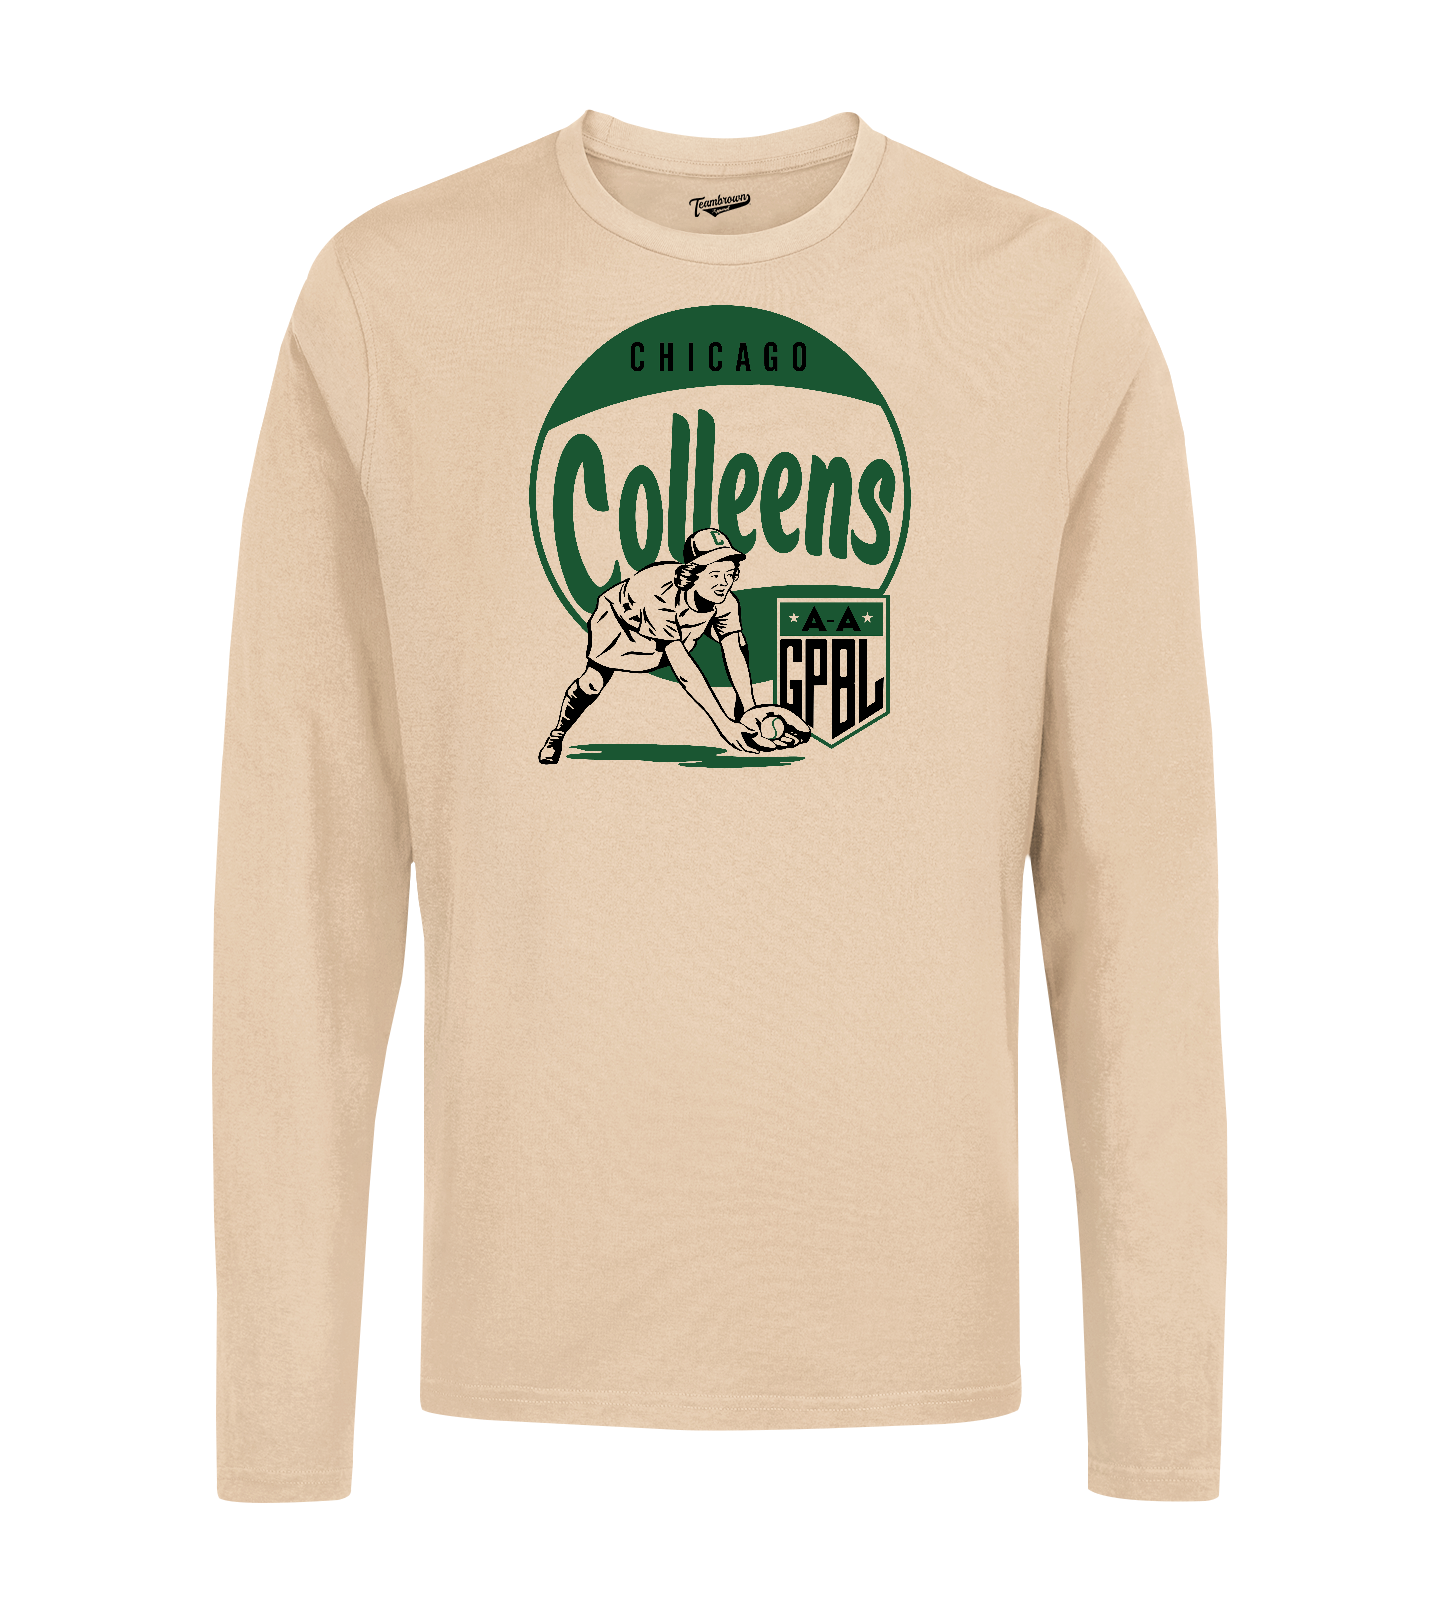 Diamond - Chicago Colleens - Unisex Long Sleeve Crew T-Shirt | Officially Licensed - AAGPBL